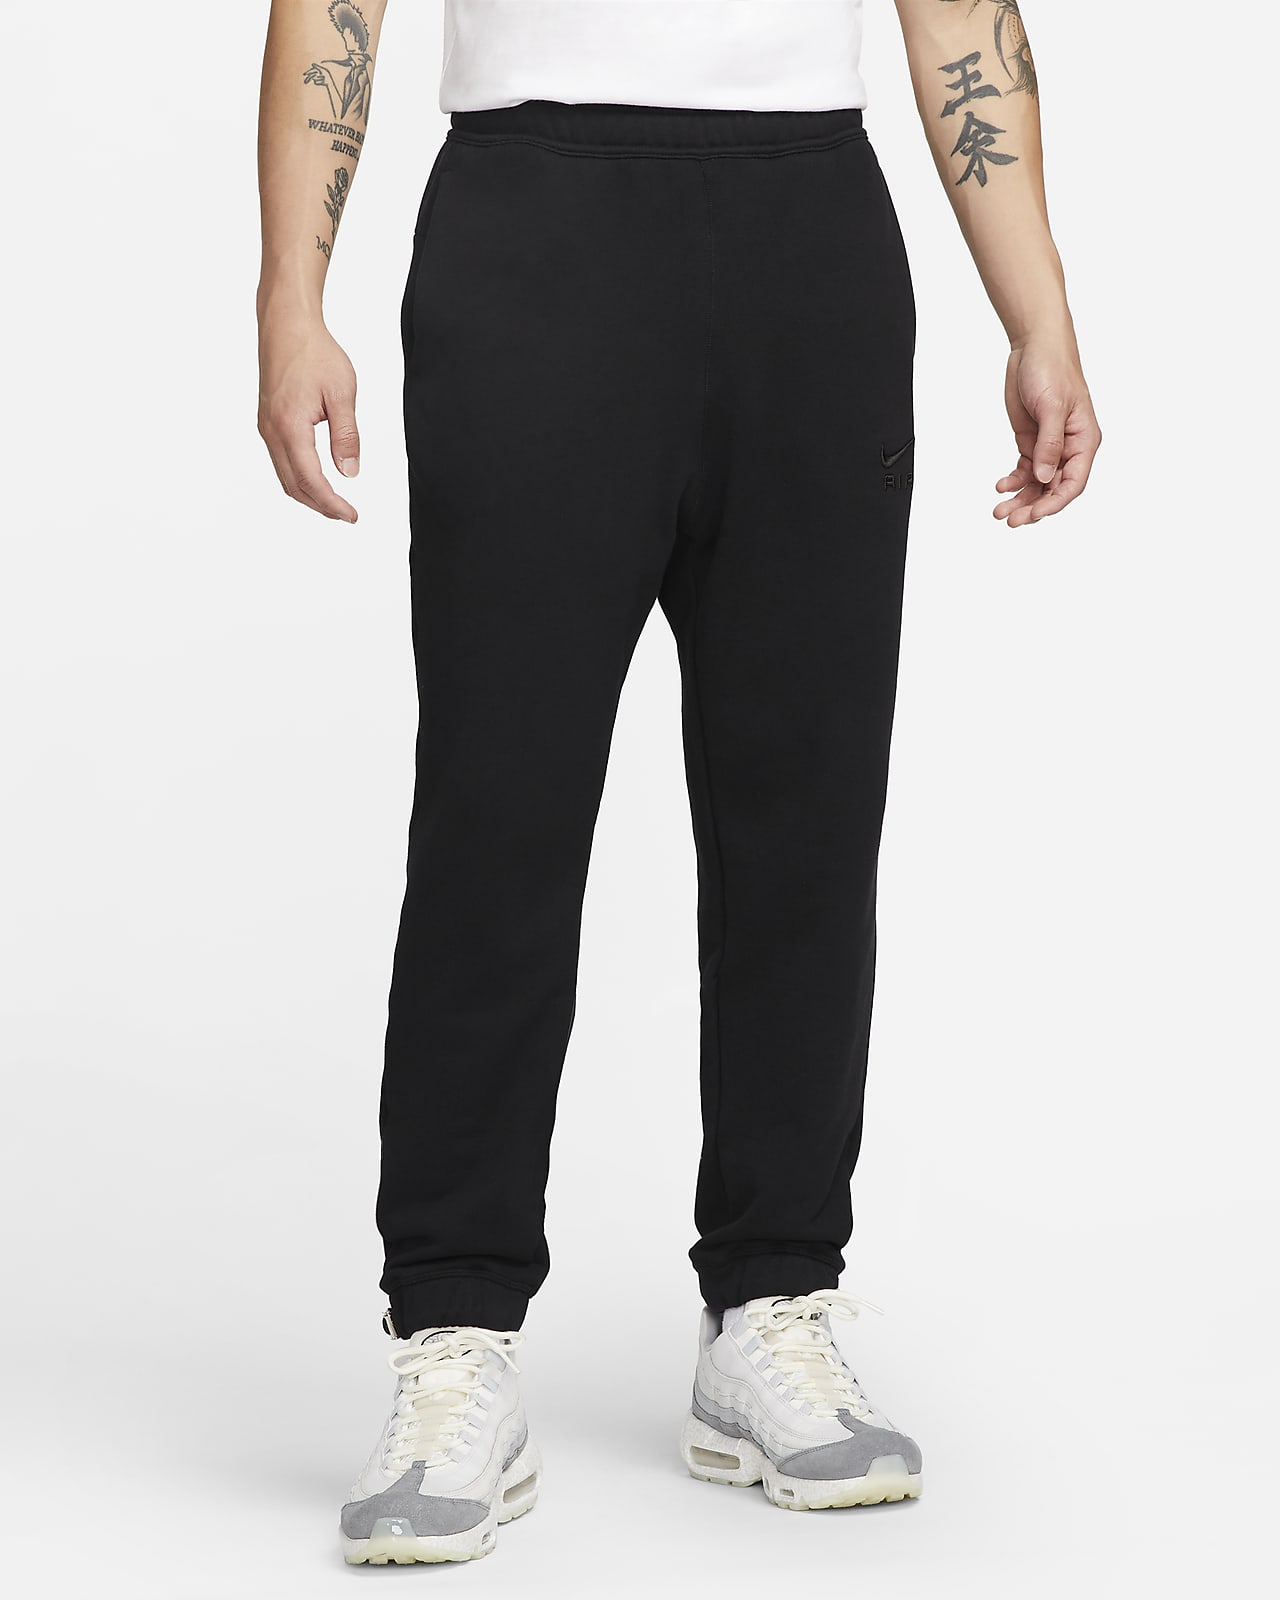 Shop the Latest Jogger Pants in the Philippines in August 2023